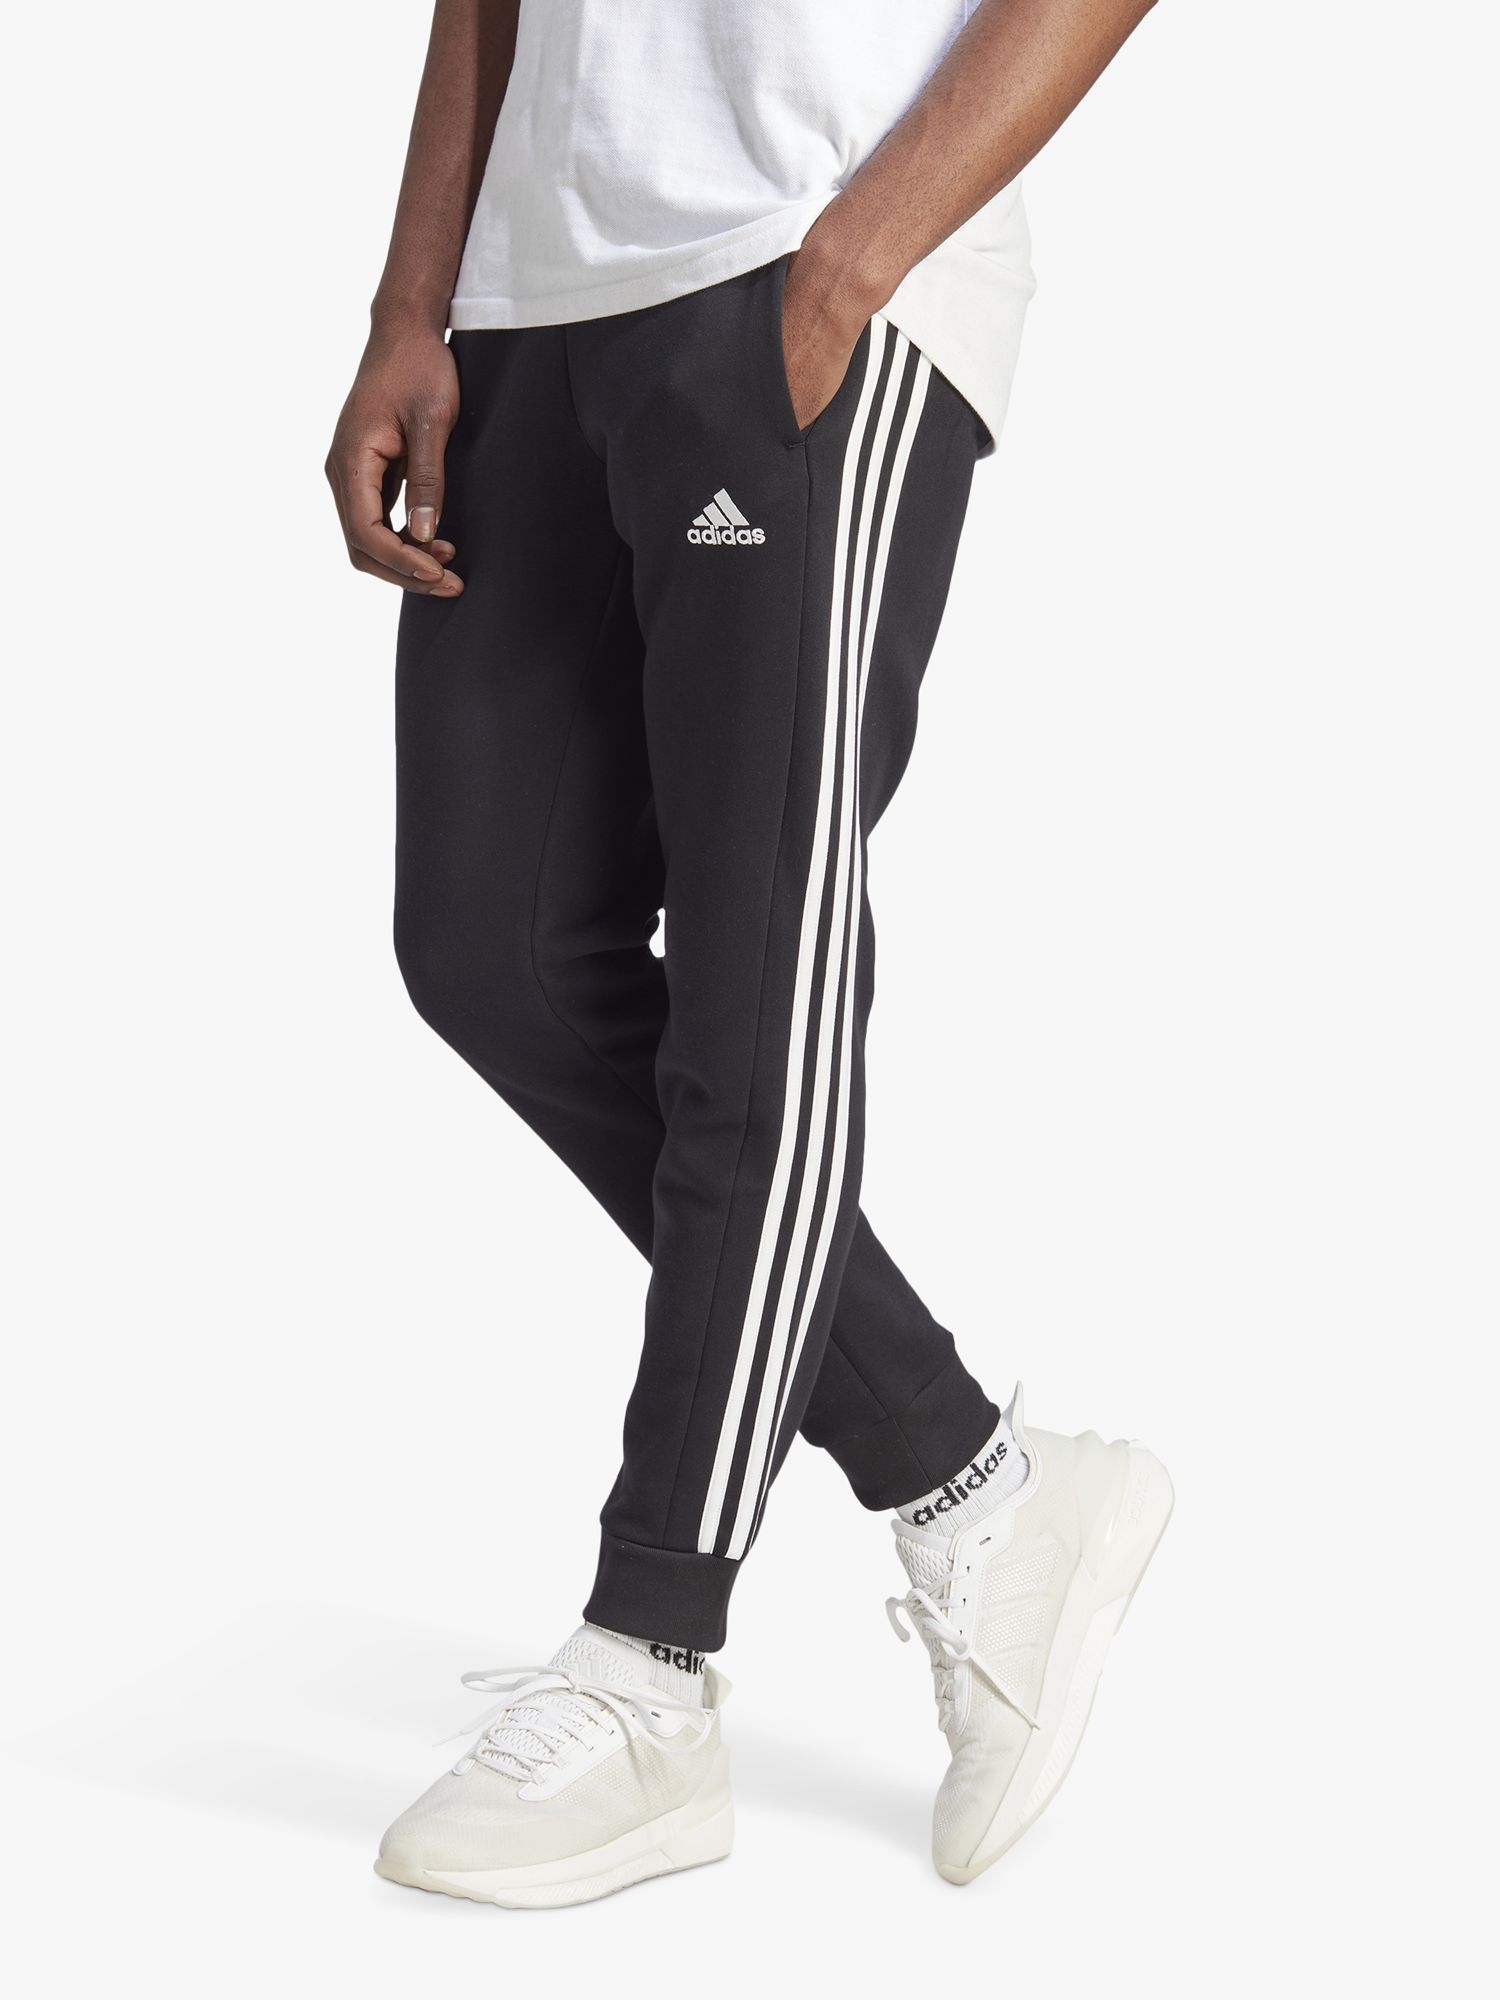 adidas + UO Fitted Track Pant  Adidas pants outfit, Adidas pants, Adidas  track pants